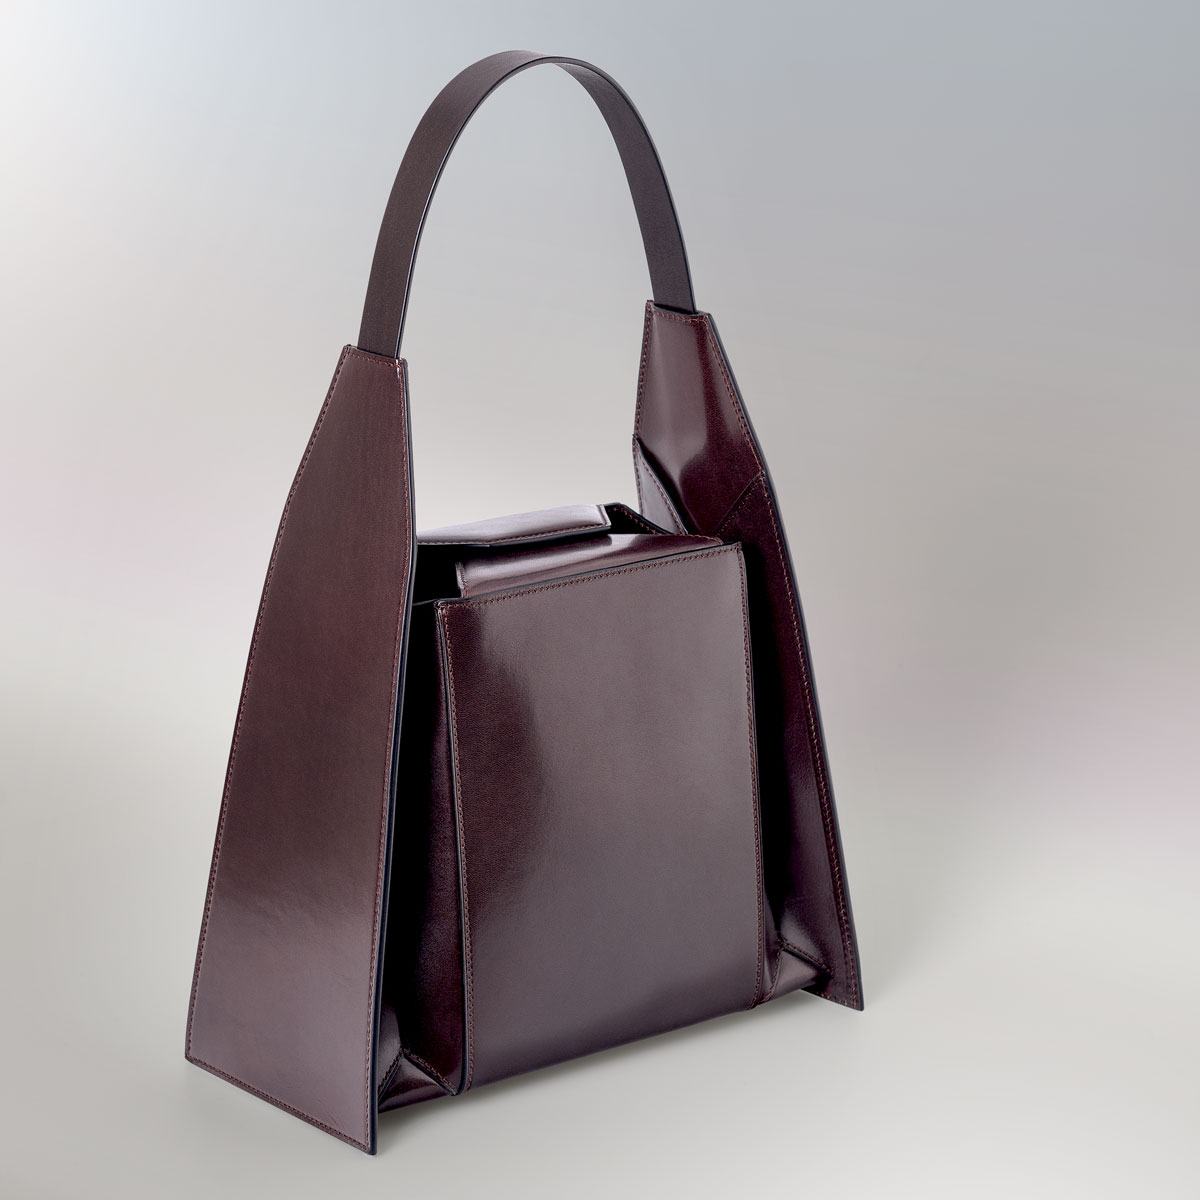 Merryl Tielman, Angelo bag: a small tote with an adjustable strap. Made in Italy, vegetable tanned cow leather, colour aubergine.